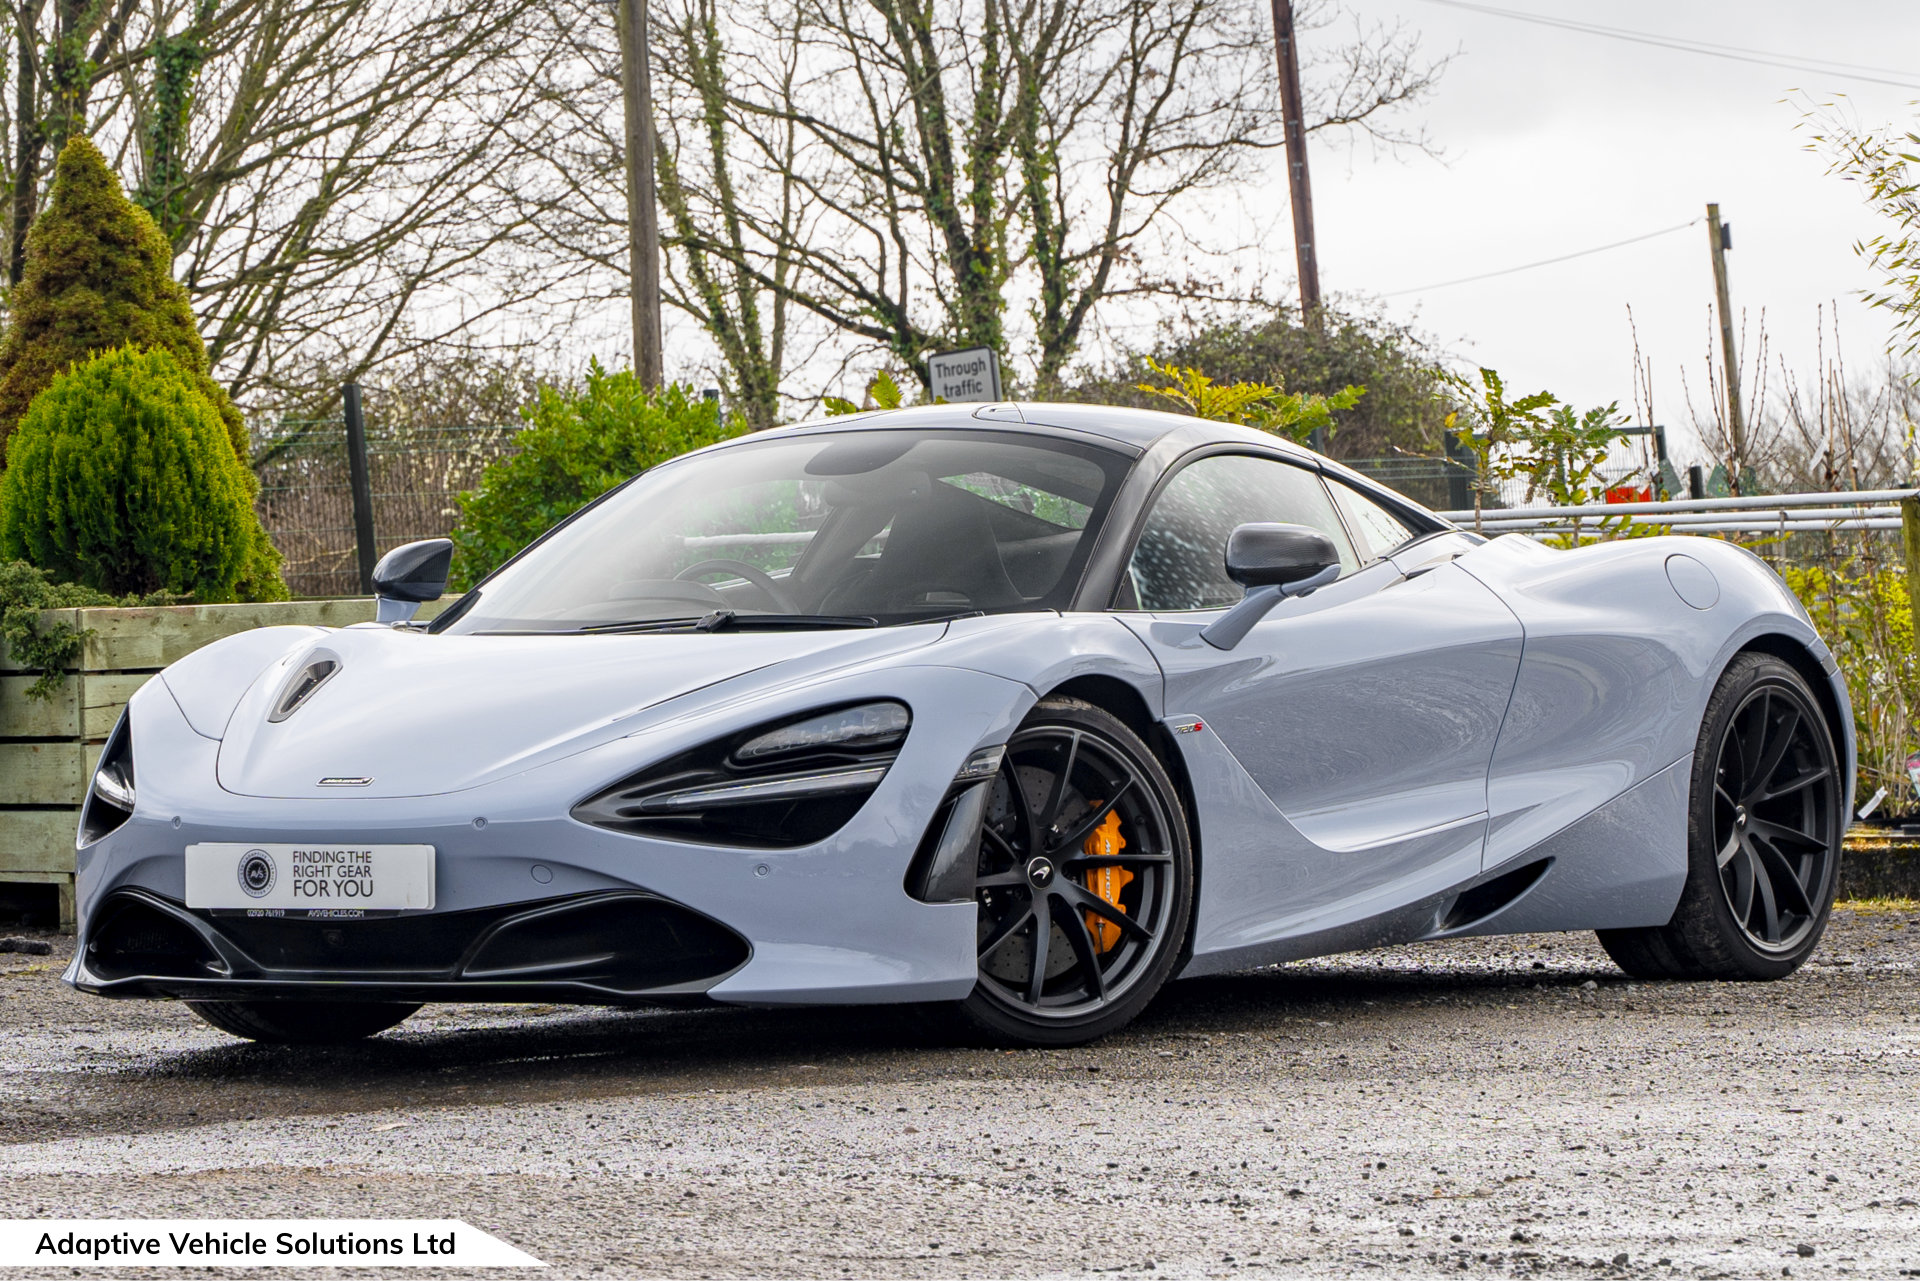 2021 McLaren 720s Performance Coupe near side front